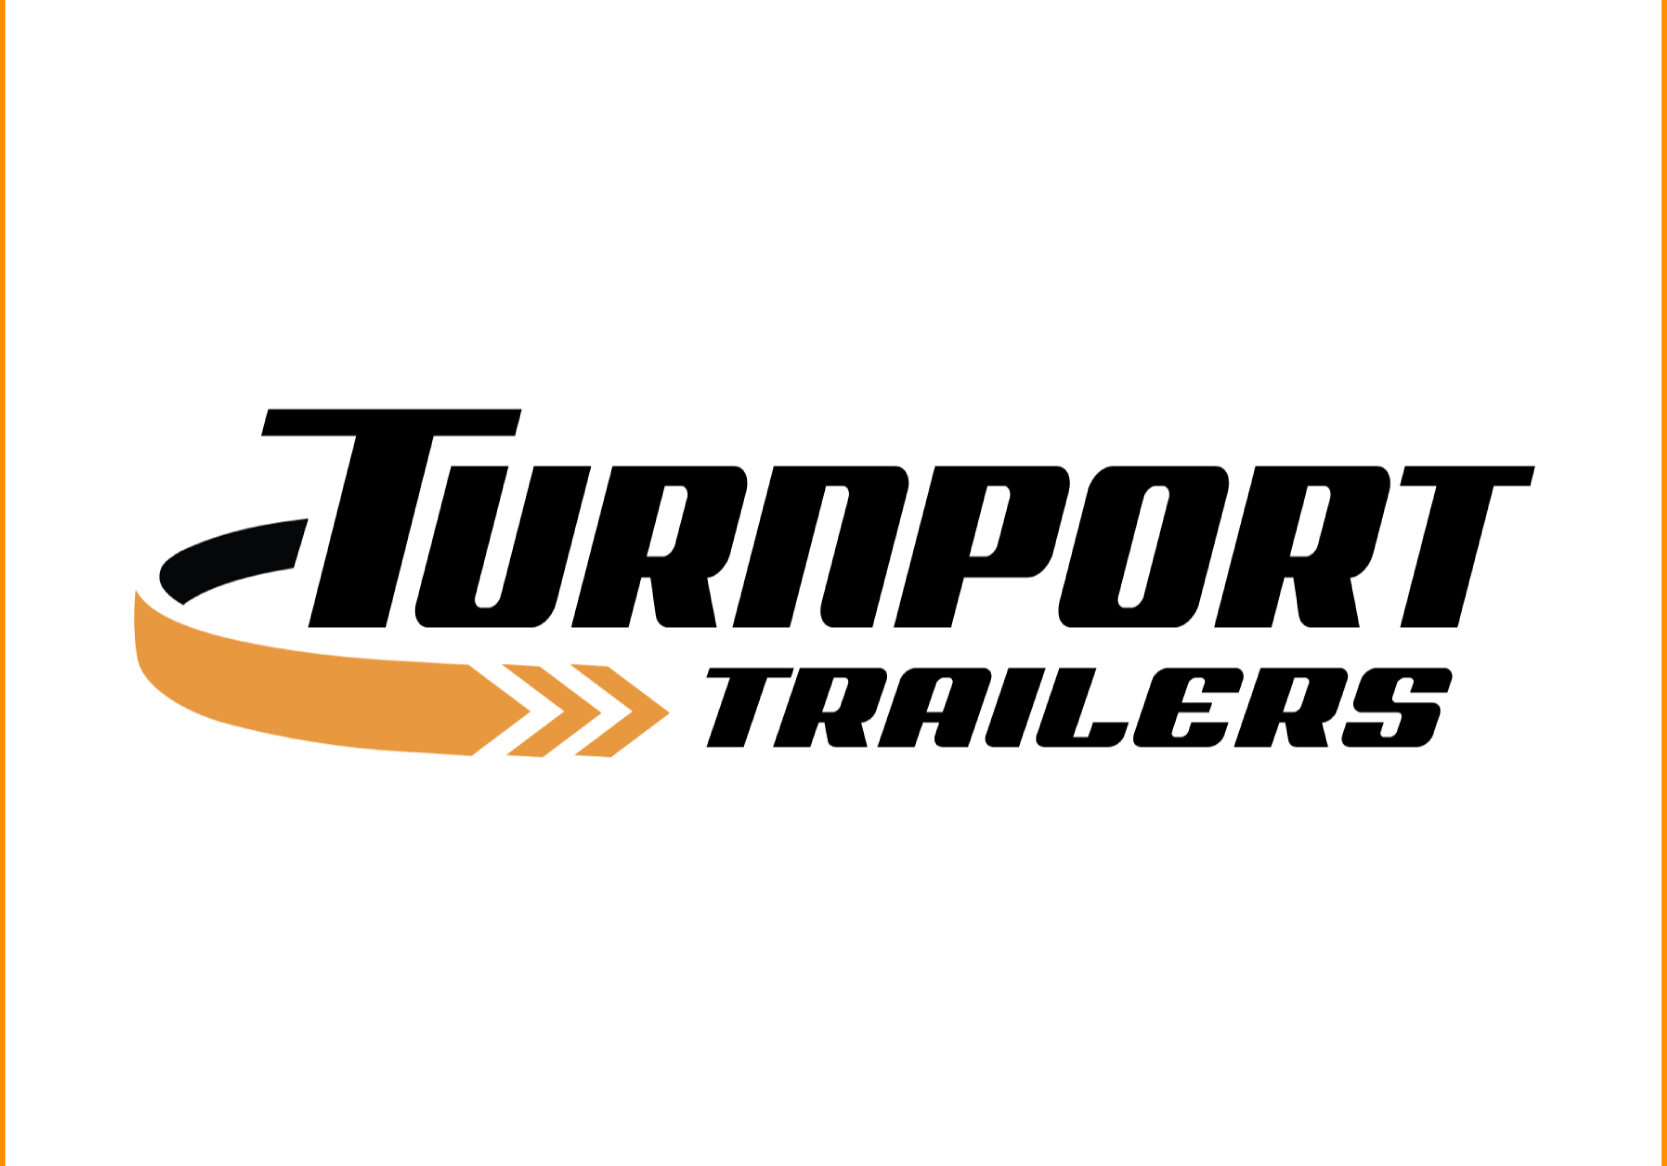 Turnport Trailers | SnapMe Creative